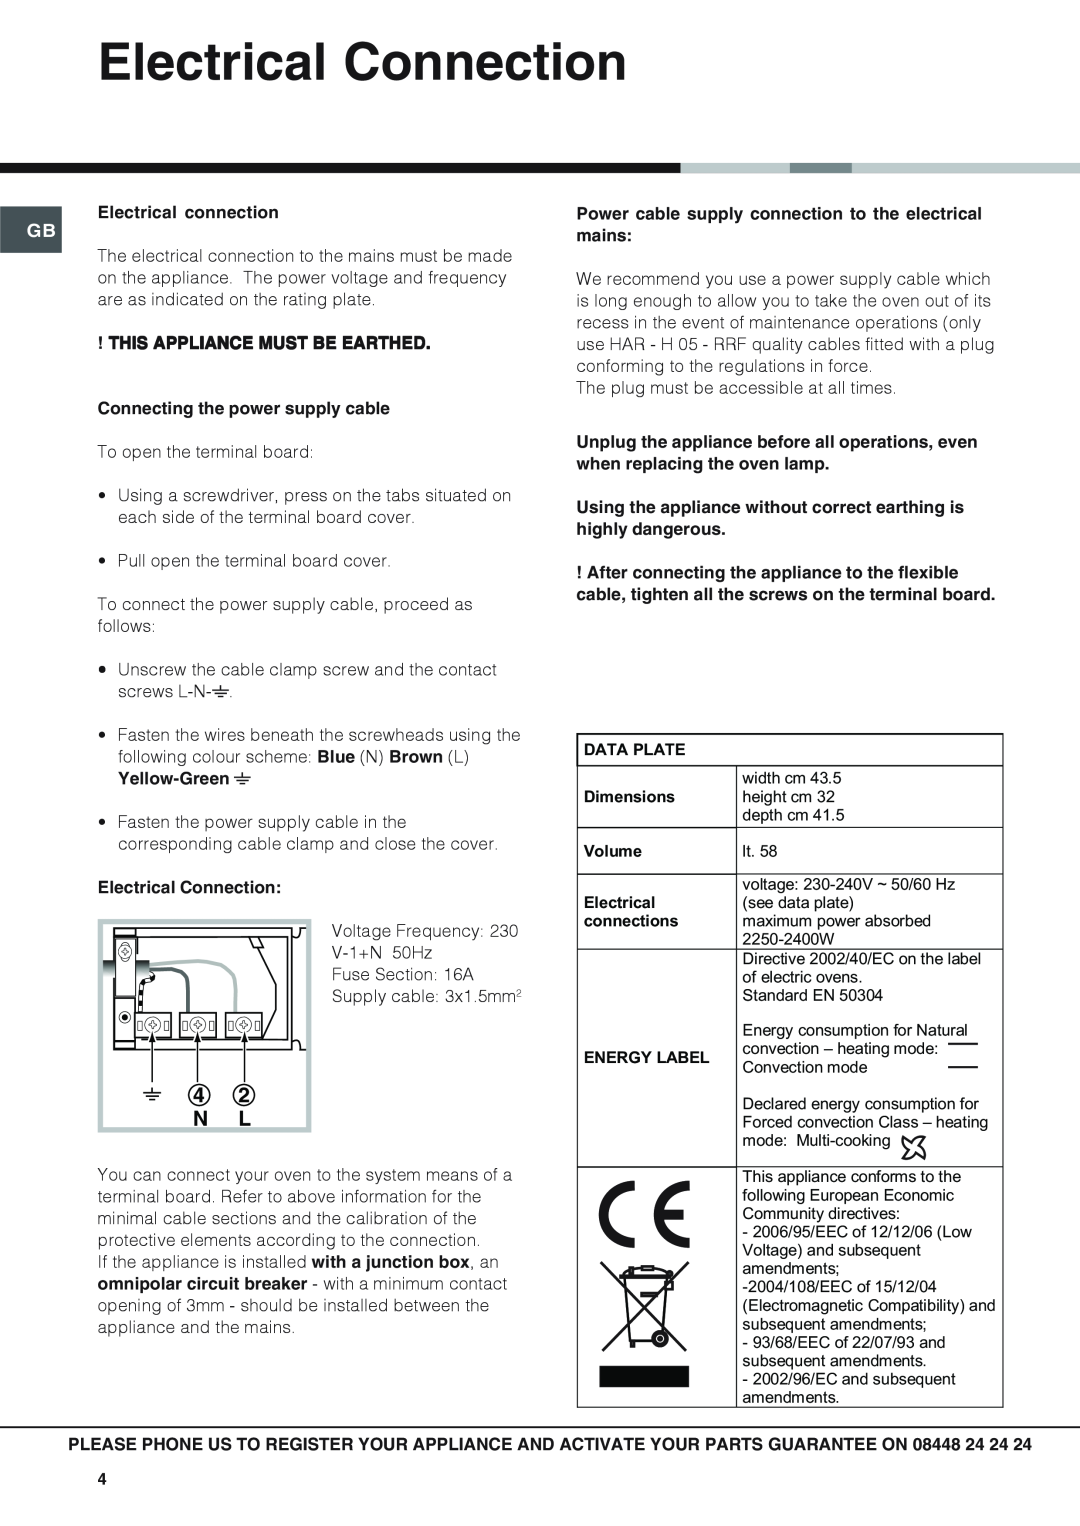 Hotpoint SX 53 X, SBS 51 X operating instructions Electrical Connection, 4 2 N L, Electrical connection 